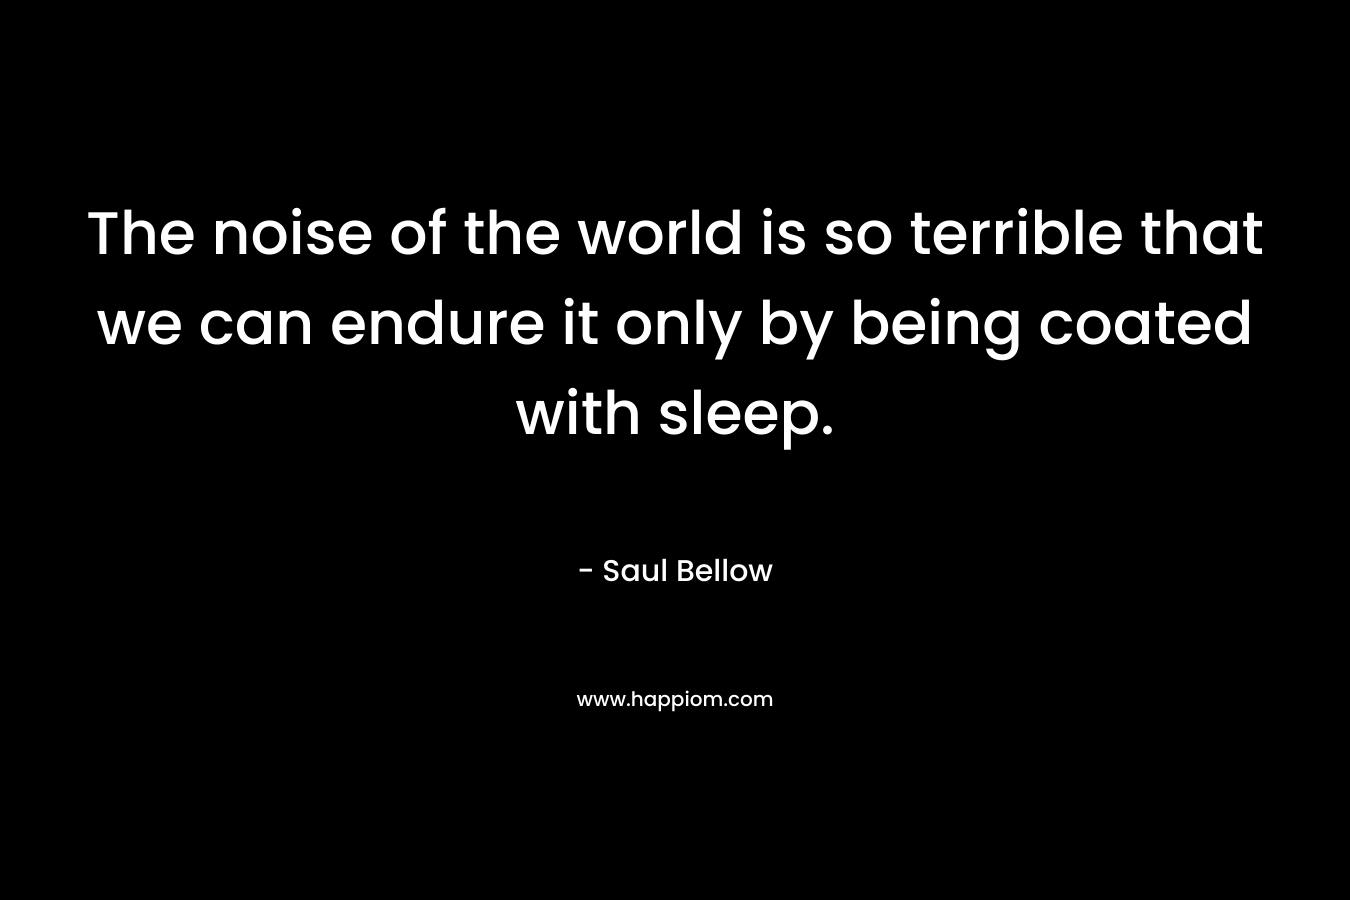 The noise of the world is so terrible that we can endure it only by being coated with sleep. – Saul Bellow